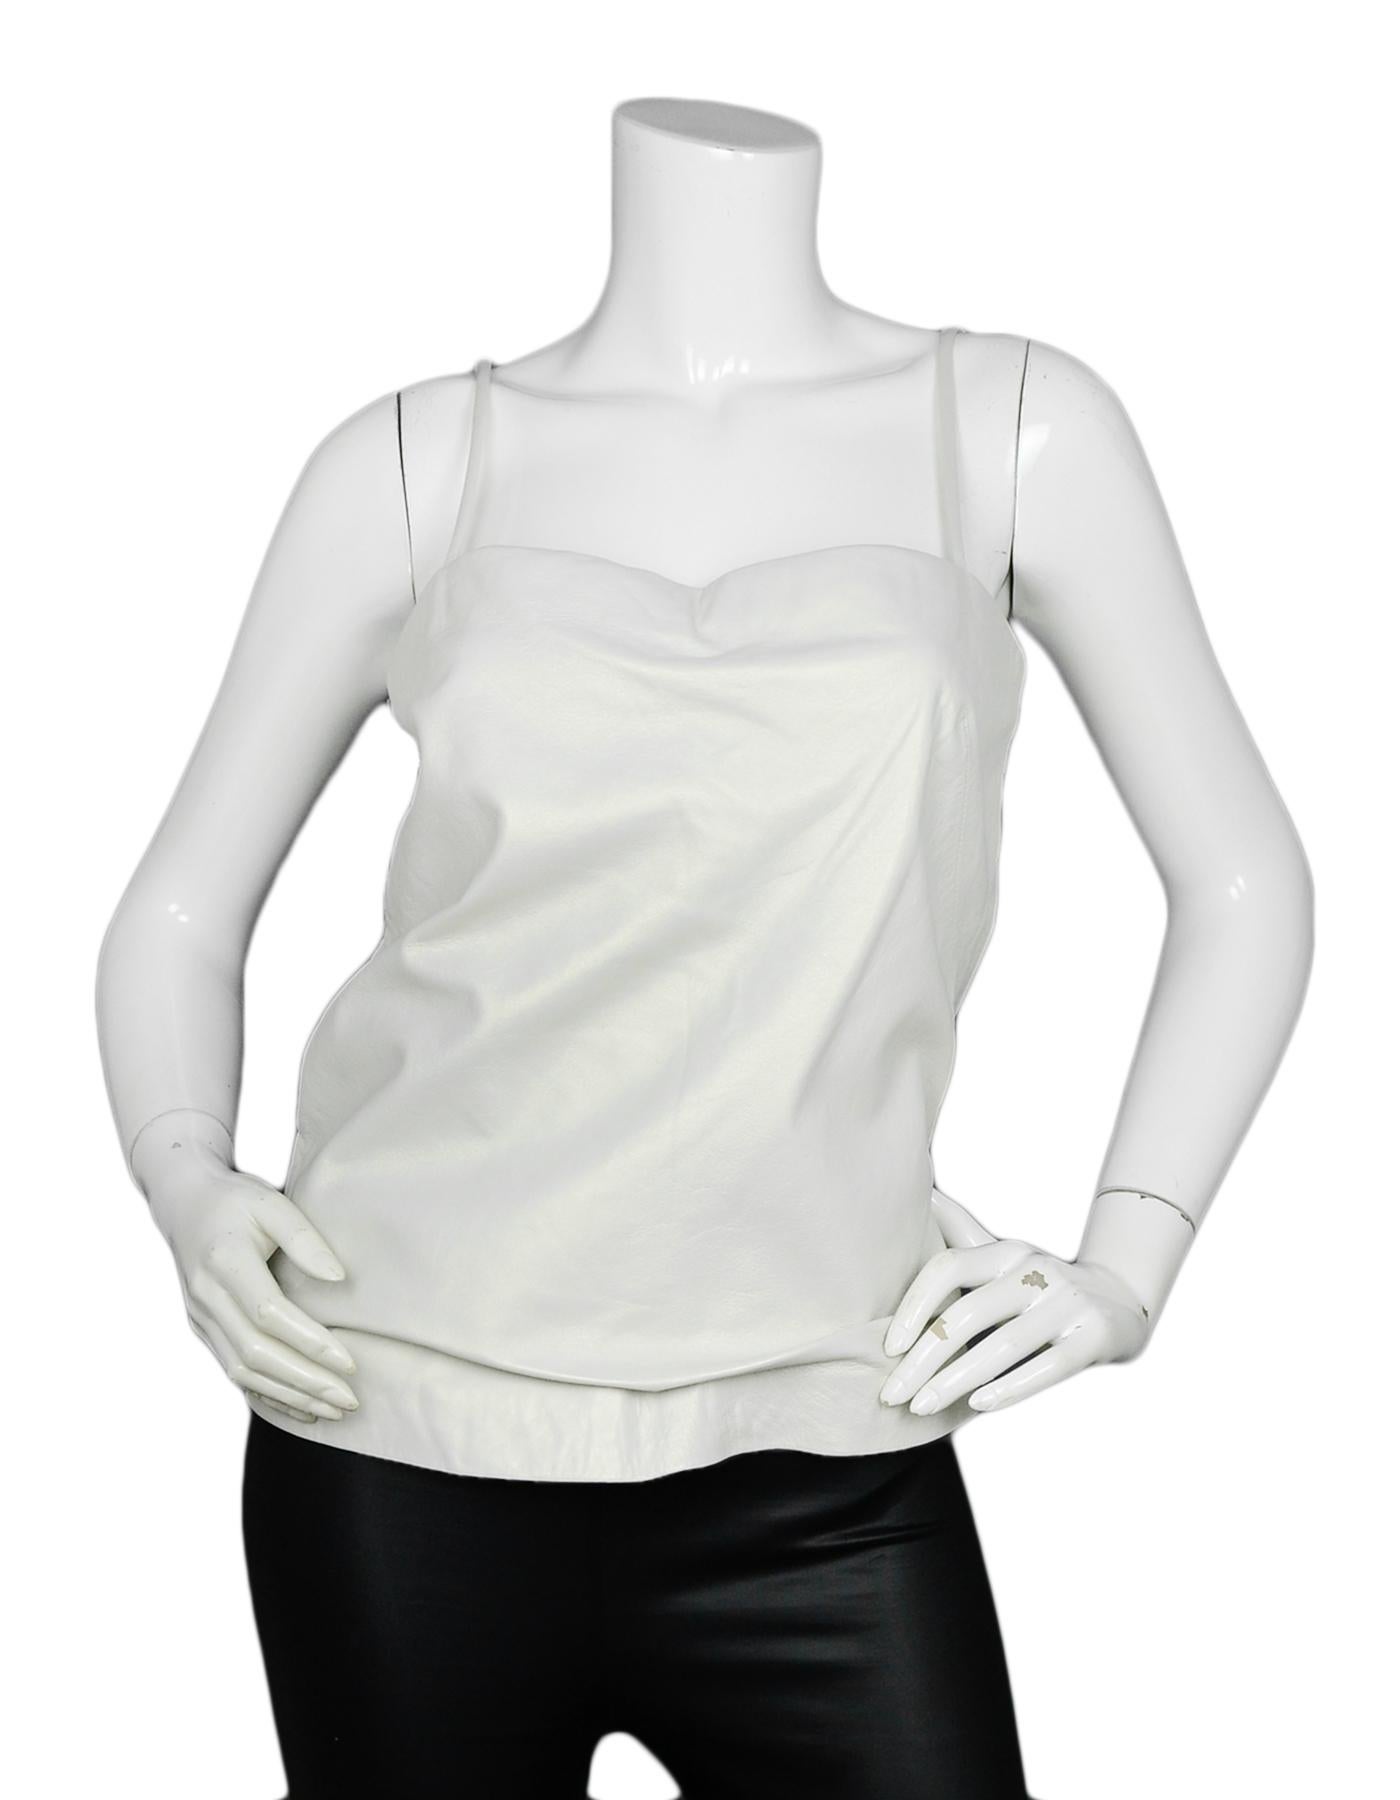 Donna Karan Spaghetti Strap Leather Top sz 10 

Made In: USA 
Color: White
Materials: 100% Lambskin leather
Lining: Fine textile, believed to be silk.
Opening/Closure: Back zip
Overall Condition: Excellent pre-owned condition 

Tag Size: US 10